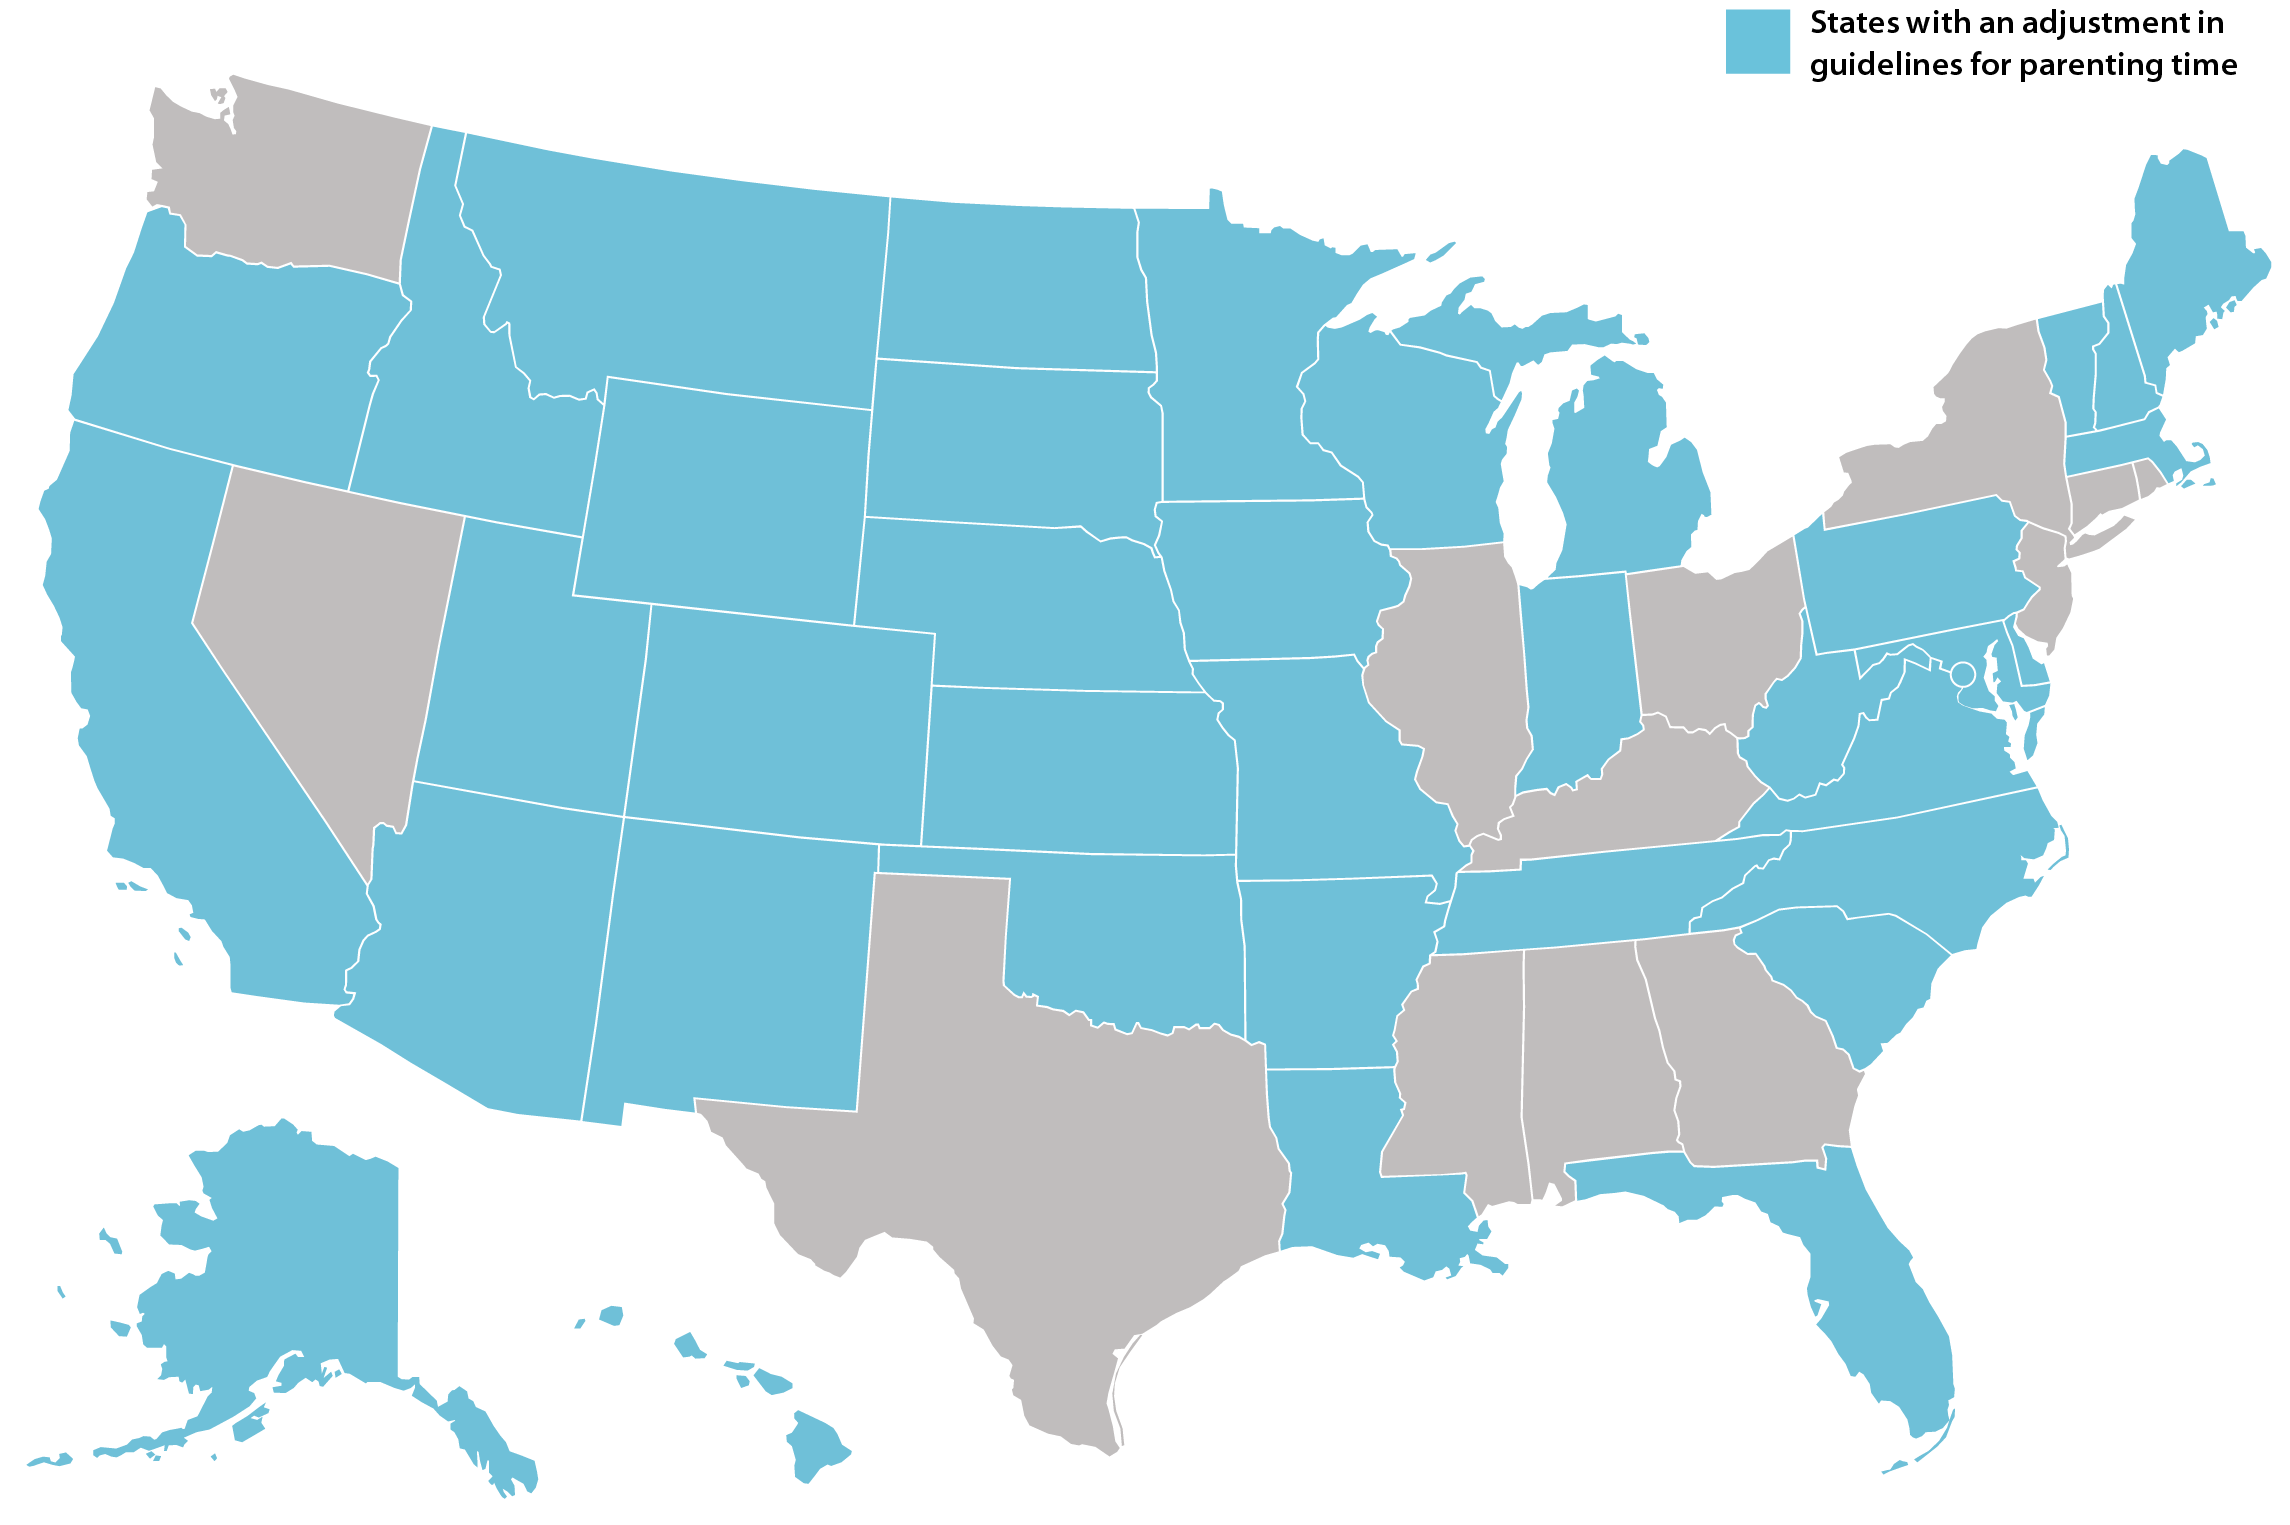 This exhibit is a map of the United States with different states shaded in one of two colors. States with an adjustment in guidelines for parenting time: Alaska, Arizona, California, Colorado, Delaware, District of Columbia, Florida, Hawaii, Idaho, Indiana, Iowa, Kansas, Louisiana, Maine, Maryland, Massachusetts, Michigan, Minnesota, Missouri, Montana, Nebraska, New Hampshire, New Mexico, North Carolina, North Dakota, Oklahoma, Oregon, Pennsylvania, South Carolina, South Dakota, Tennessee, Utah, Vermont, Virginia, West Virginia, Wisconsin, Wyoming. 